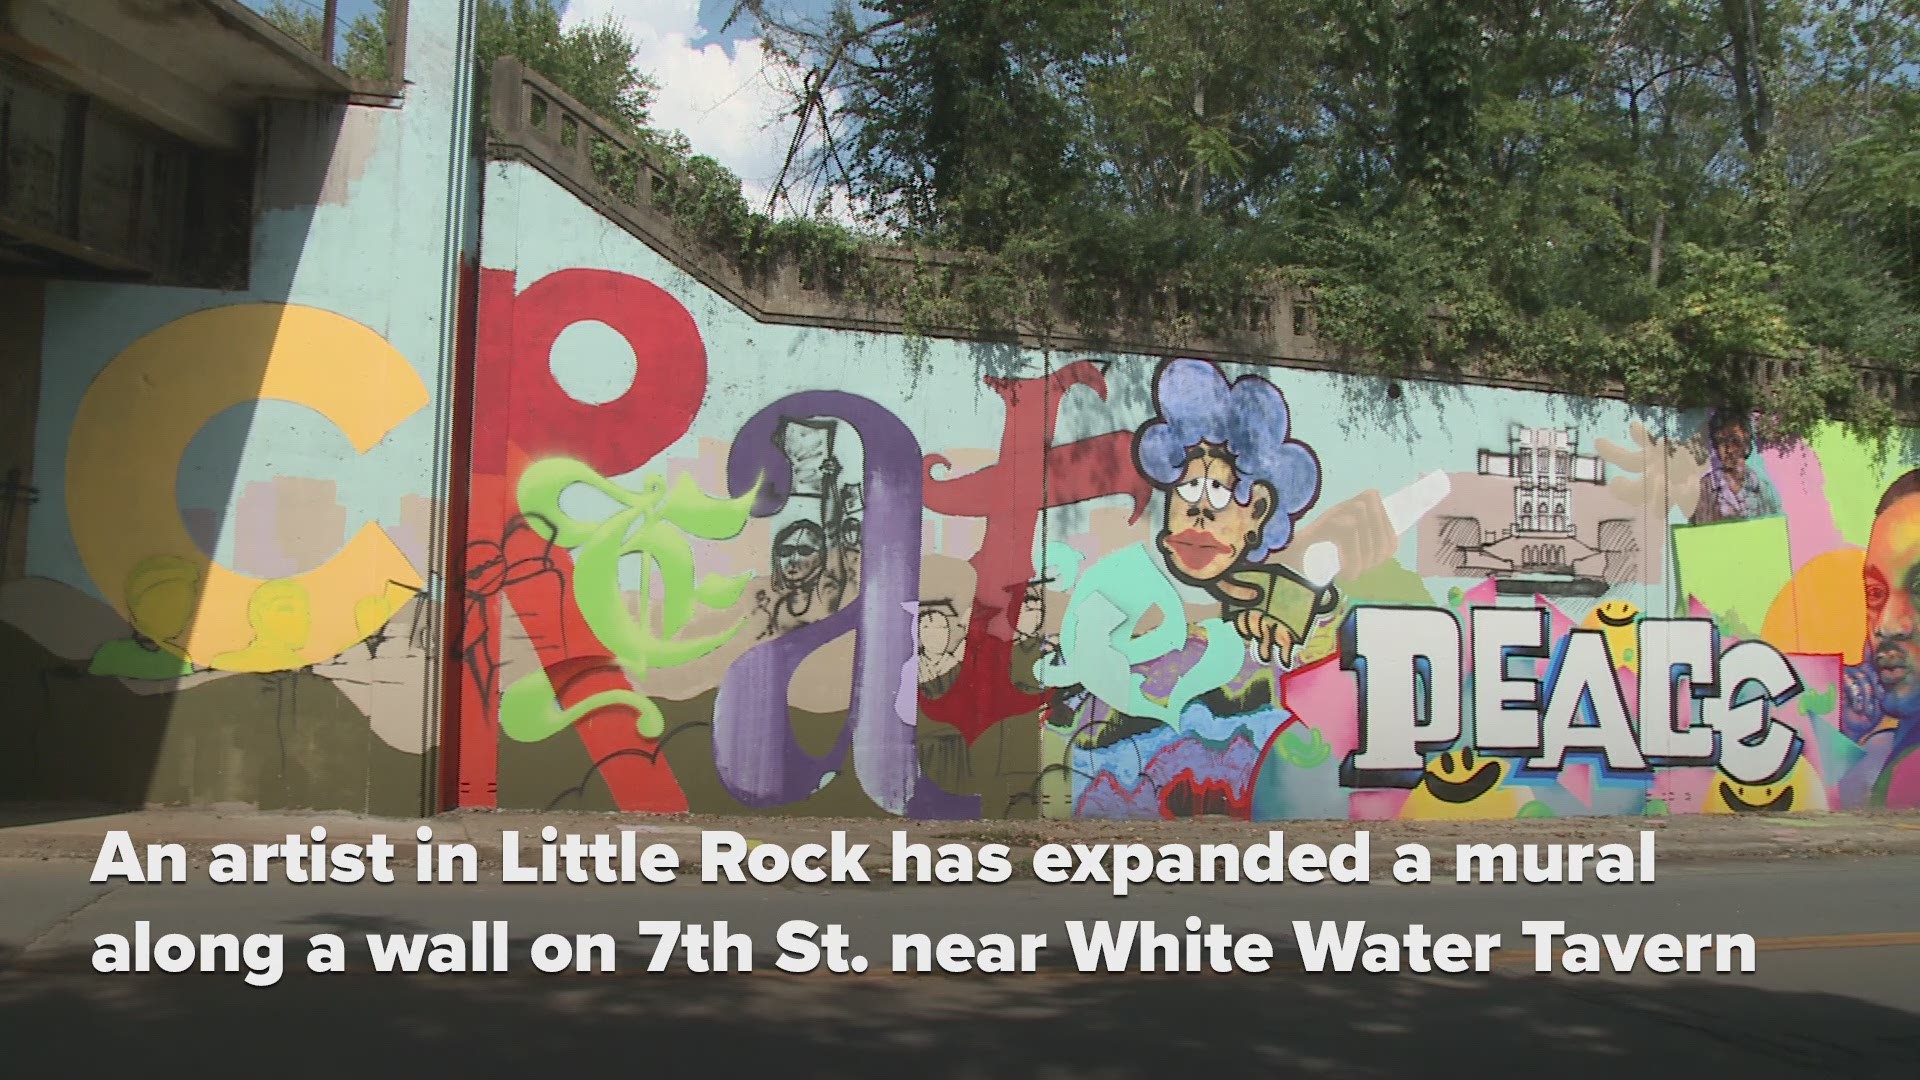 The mural was expanded on West 7th Street near White Water Tavern as part of Arkansas Peace Week, which coincides with the United Nation's Day of Peace in the 3rd week of September.